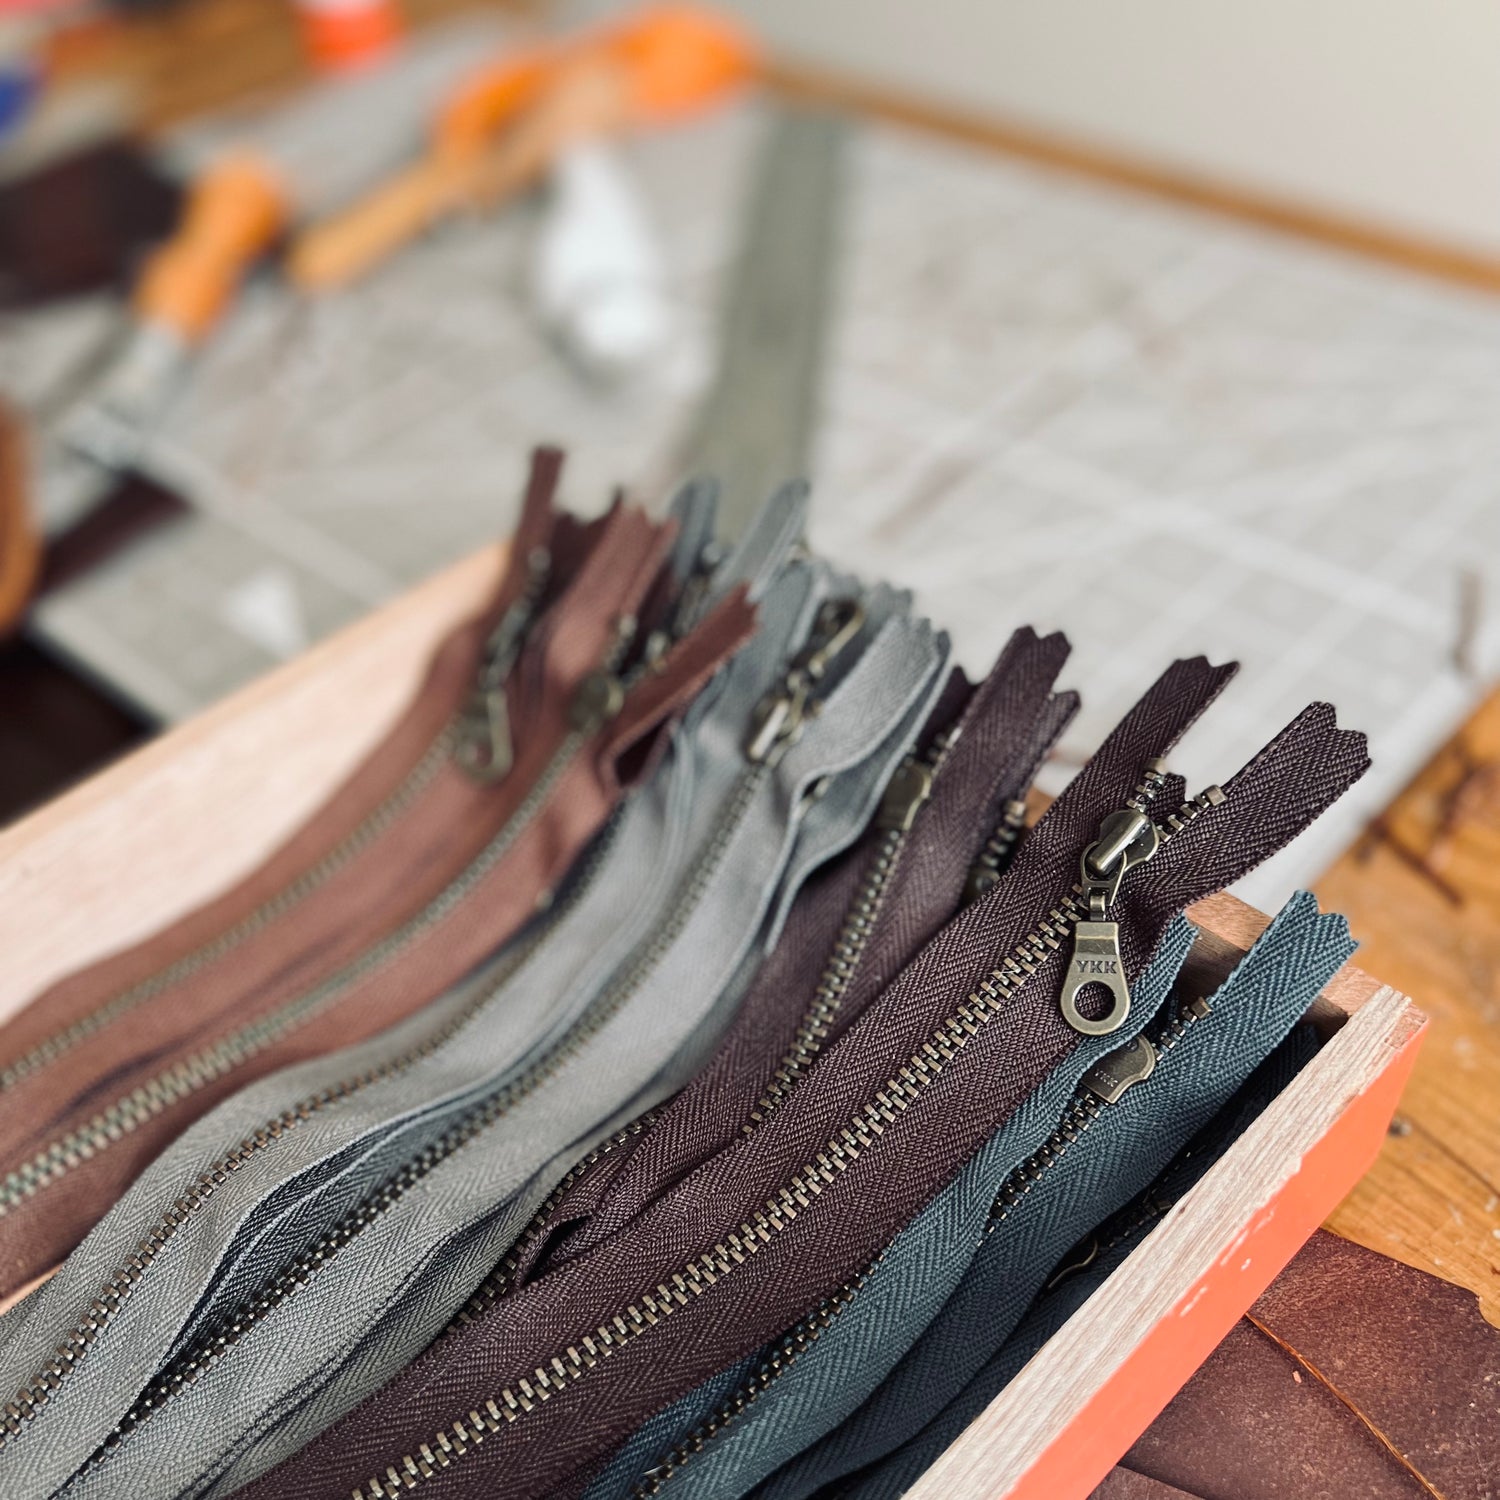 view of high quality YKK zippers that are used in 1974 leather goods